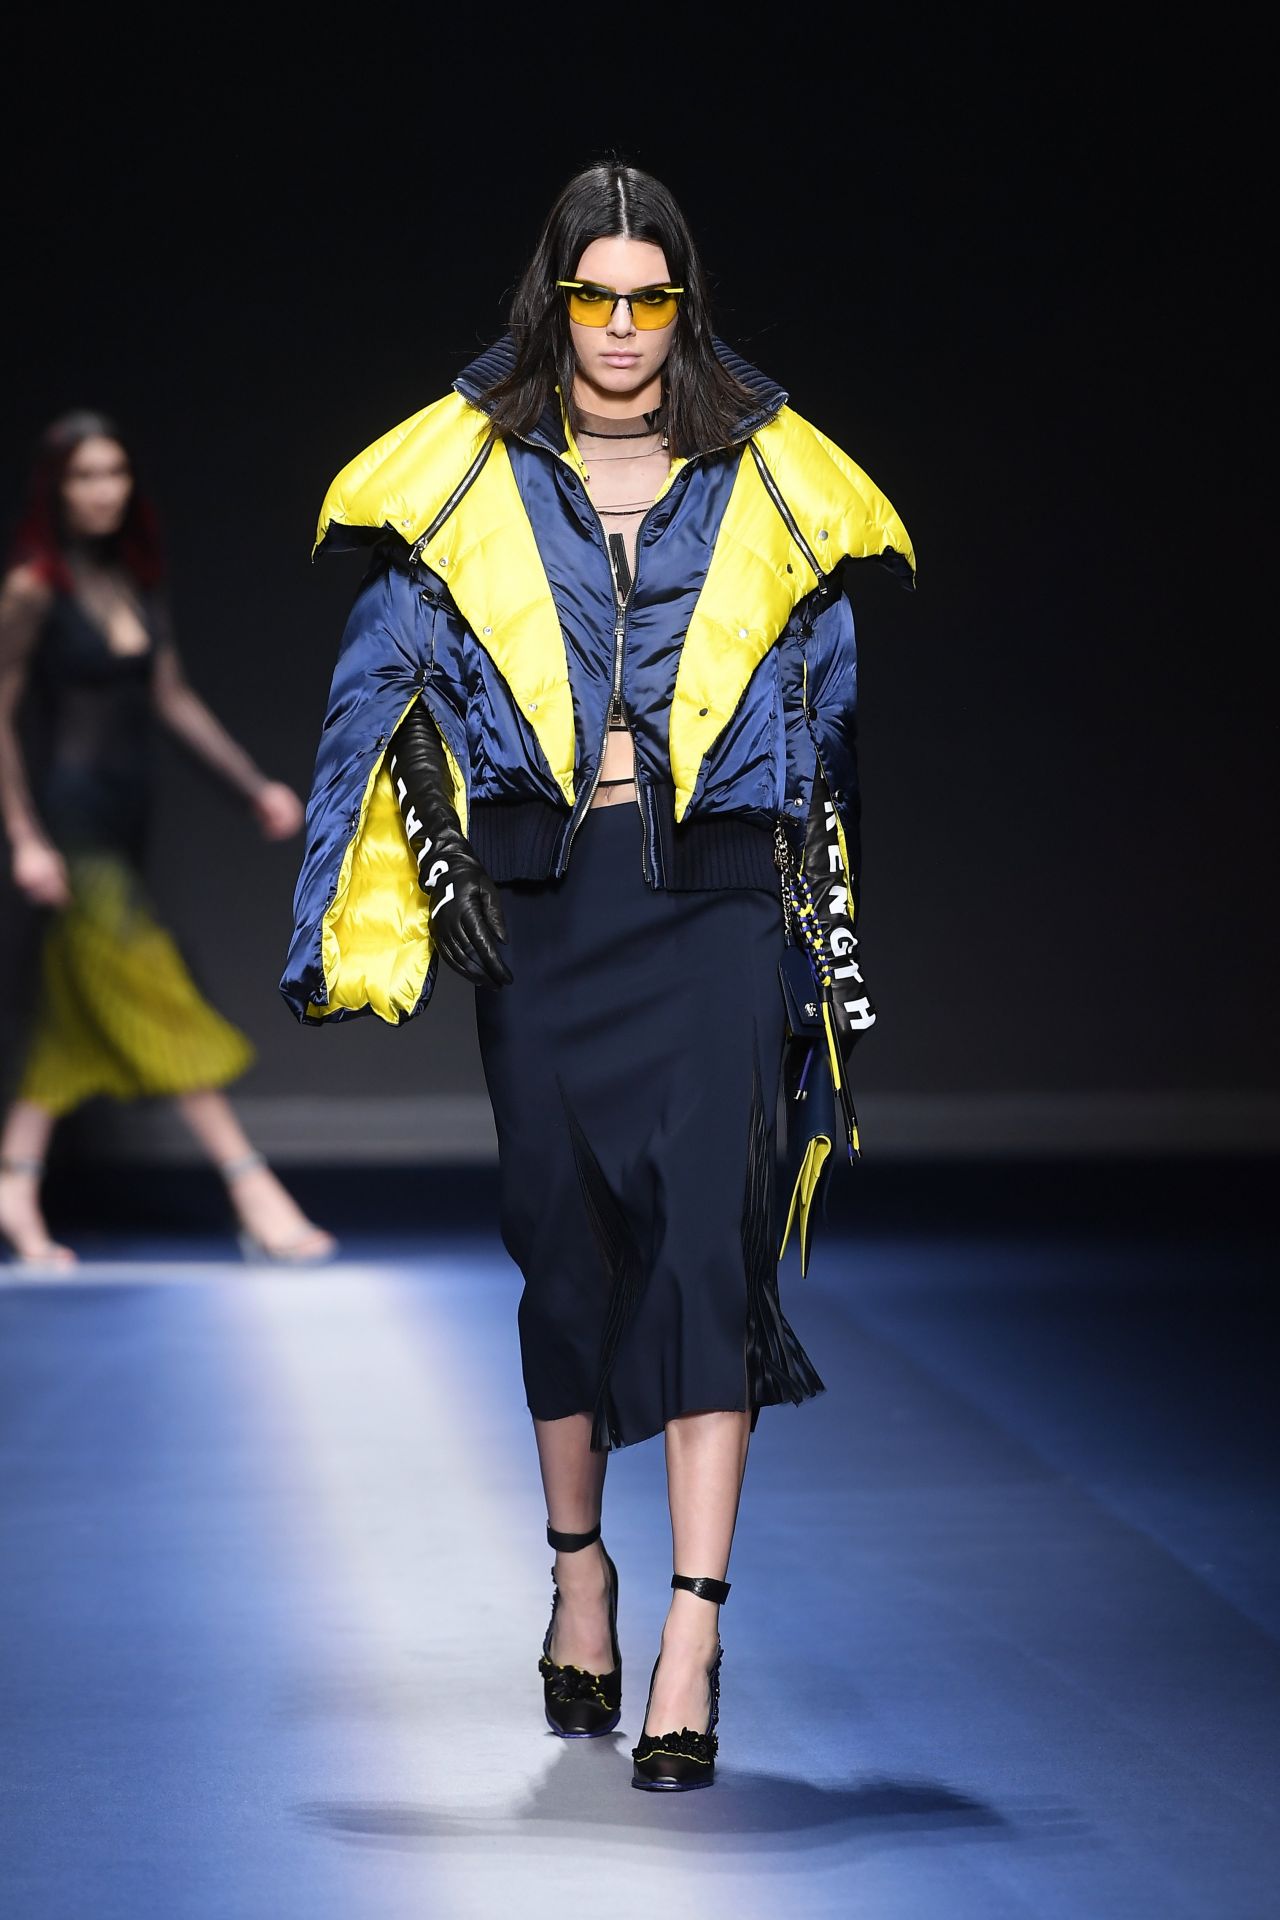 Kendall Jenner Walks the Runway at the Versace Show - Milan Fashion ...